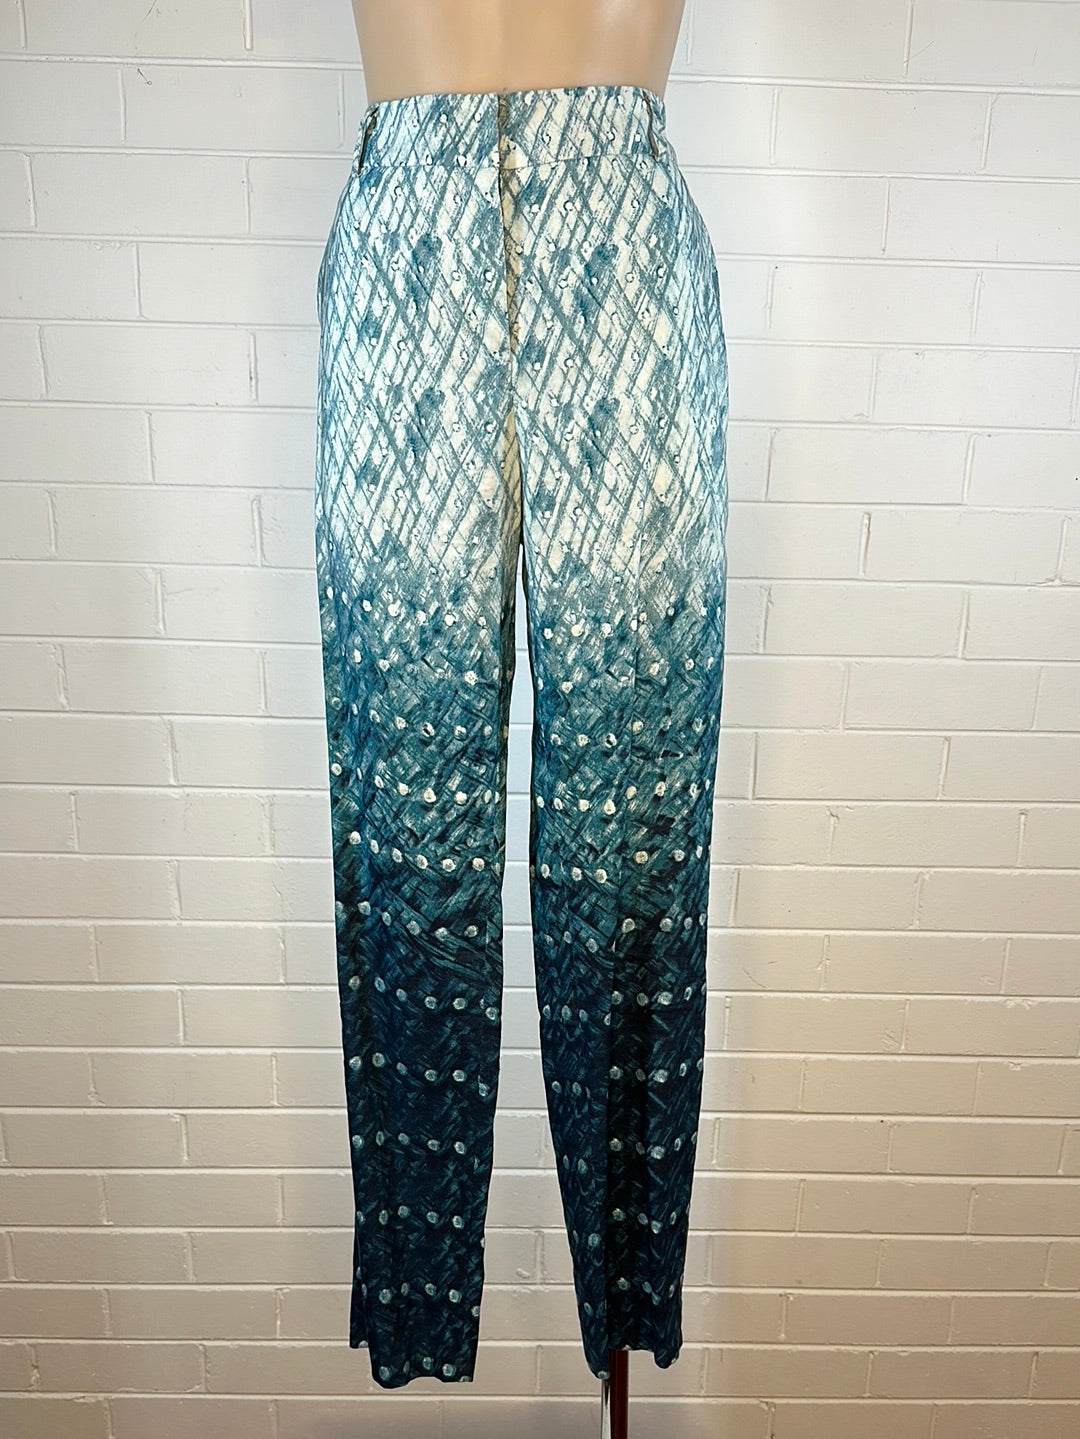 Collette Dinnigan, pants, size 12, tapered leg